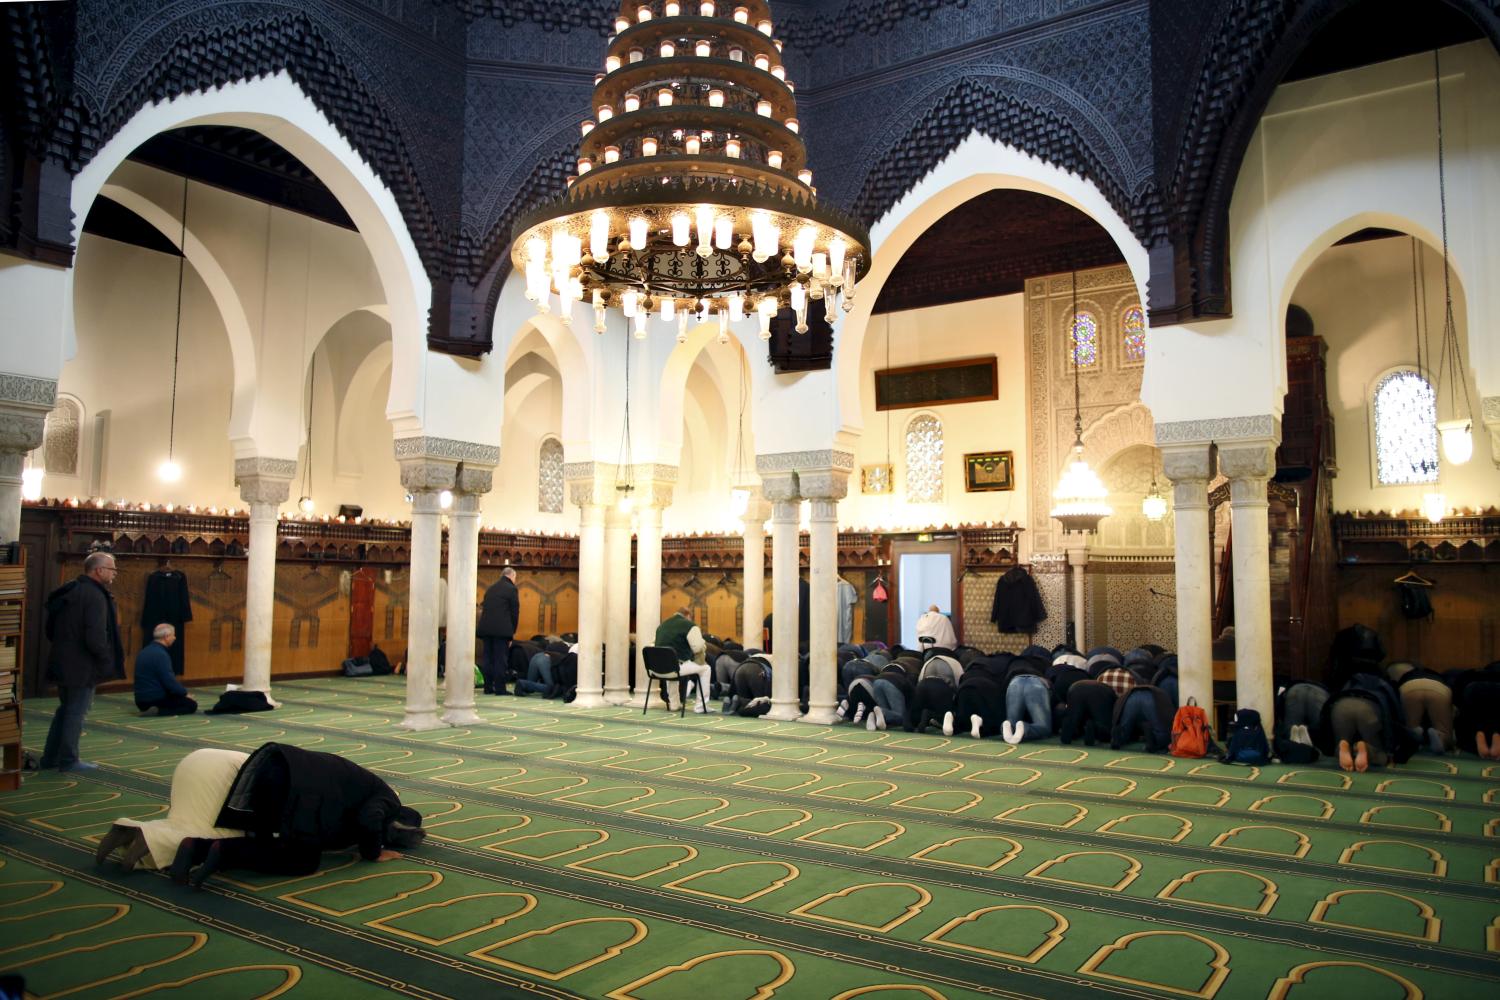 Members of the Muslim community pray in the Paris Grand Mosque during an open day weekend for mosques in France, January 10, 2016. REUTERS/Charles Platiau - RTX21QR1